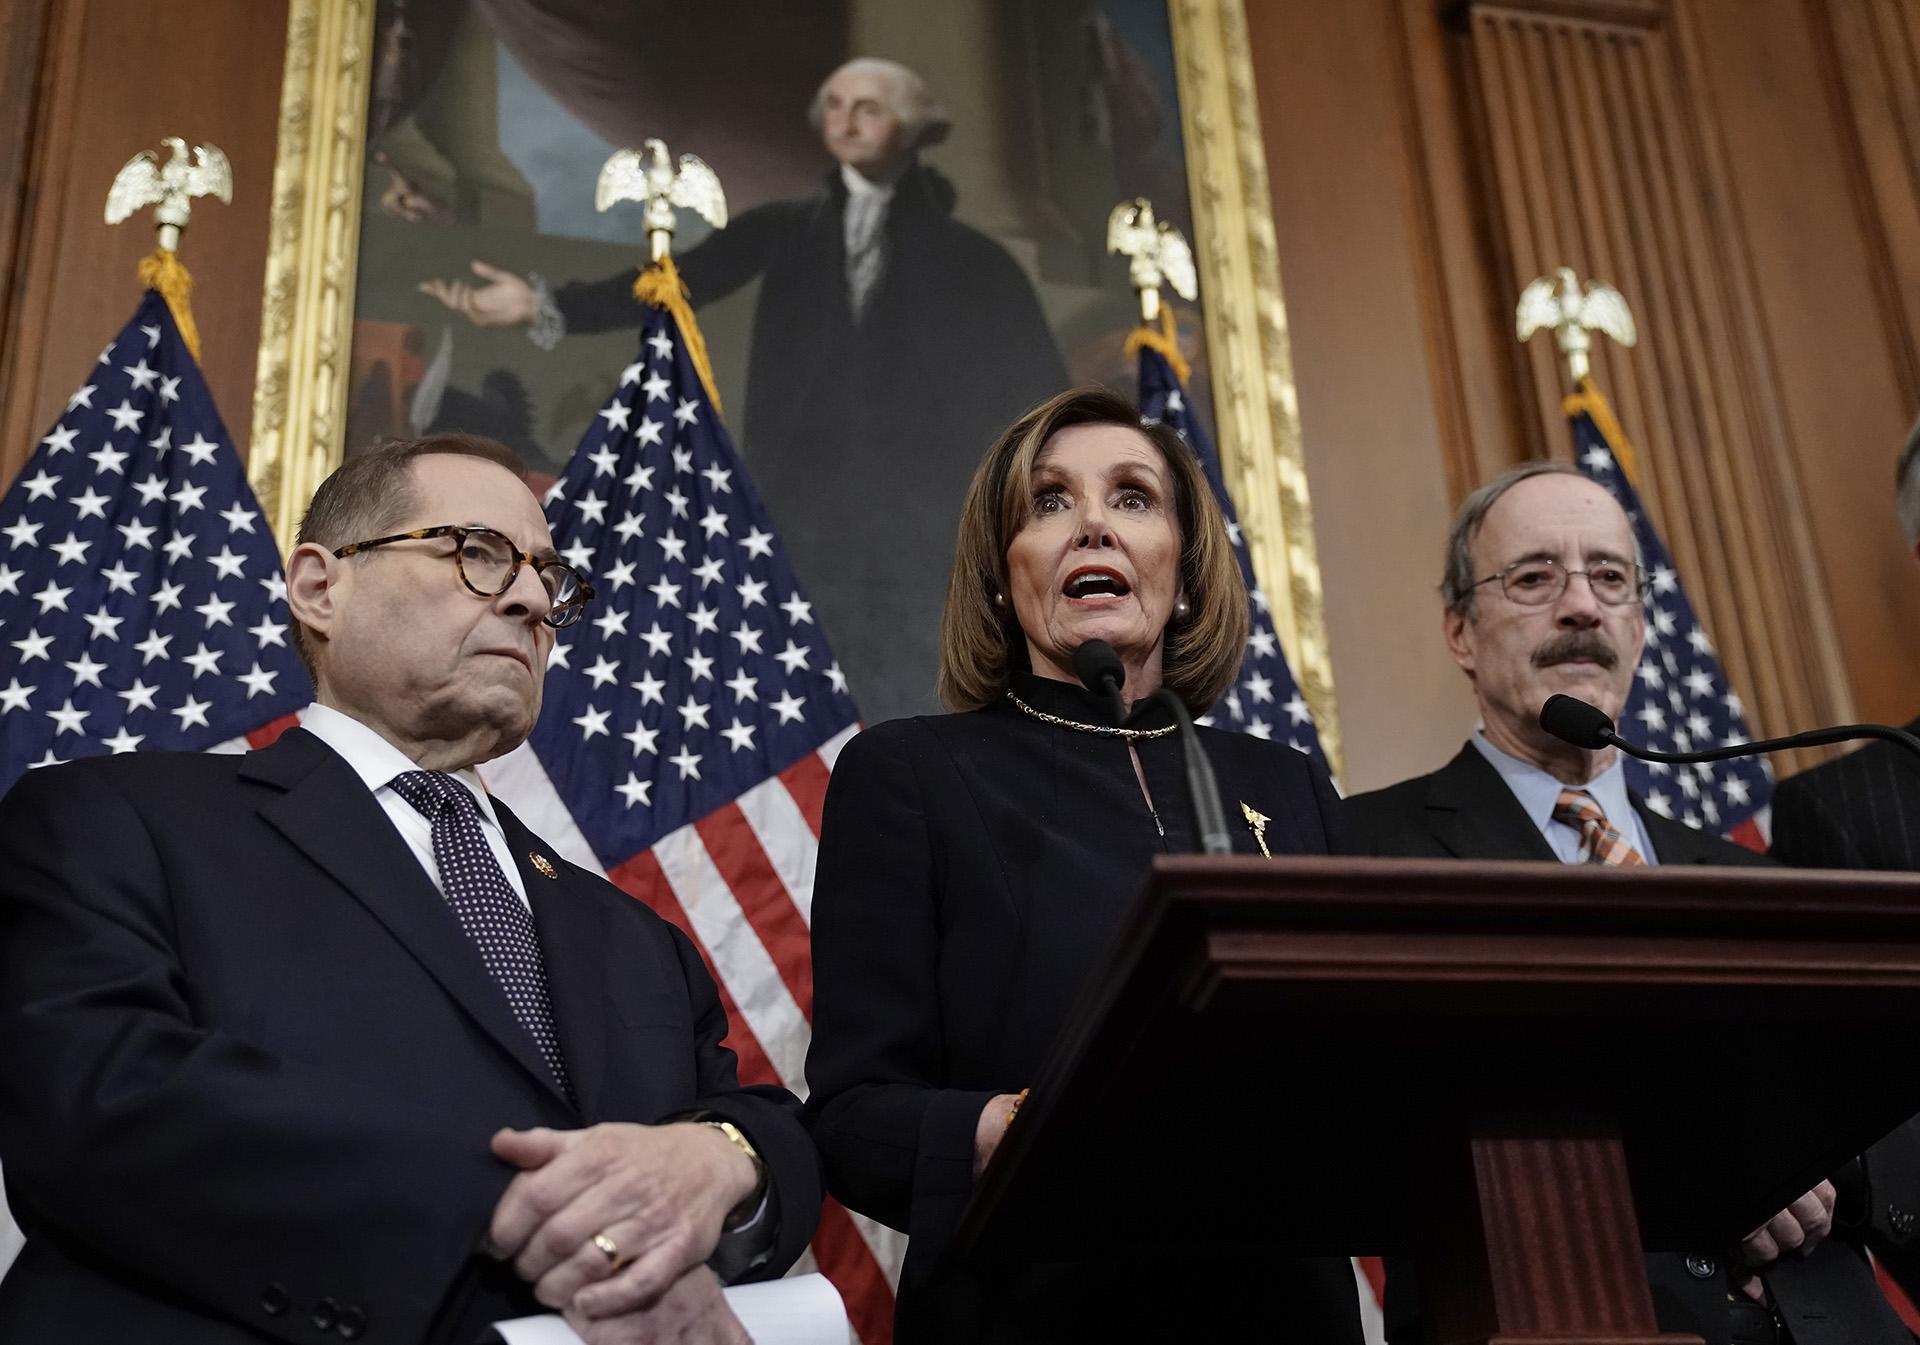 Speaker of the House Nancy Pelosi, D-Calif., flanked by House Judiciary Committee Chairman Jerrold Nadler, D-N.Y., left, and House Foreign Affairs Committee Chairman Eliot Engel, D-N.Y., speaks to reporters at the Capitol in Washington, Wednesday, Dec. 18, 2019, after the House of Representatives voted to impeach President Donald Trump on two charges, abuse of power and obstruction of Congress. (AP Photo / J. Scott Applewhite)